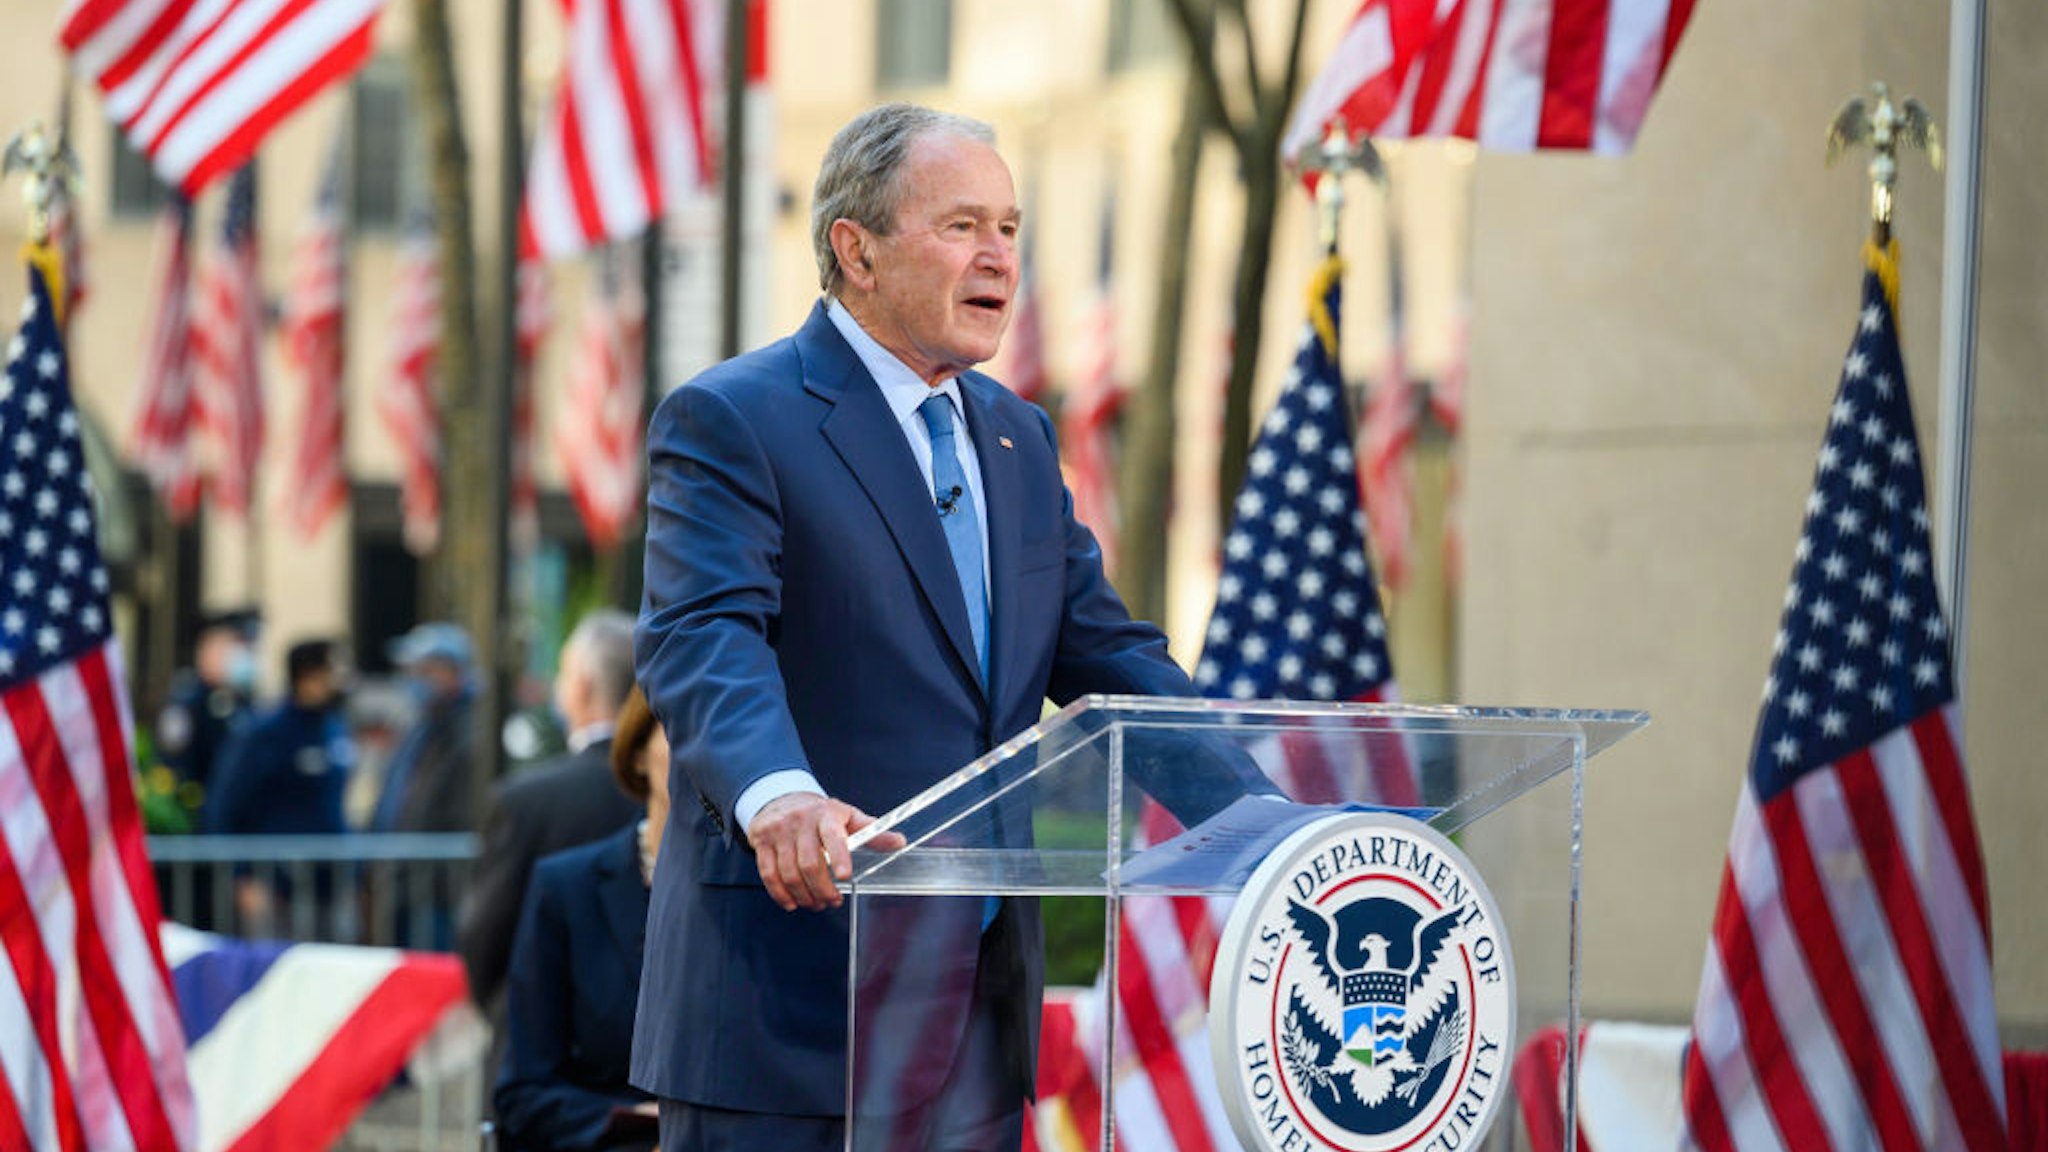 George W. Bush during the Naturalization Ceremony on Tuesday, April 20, 2021